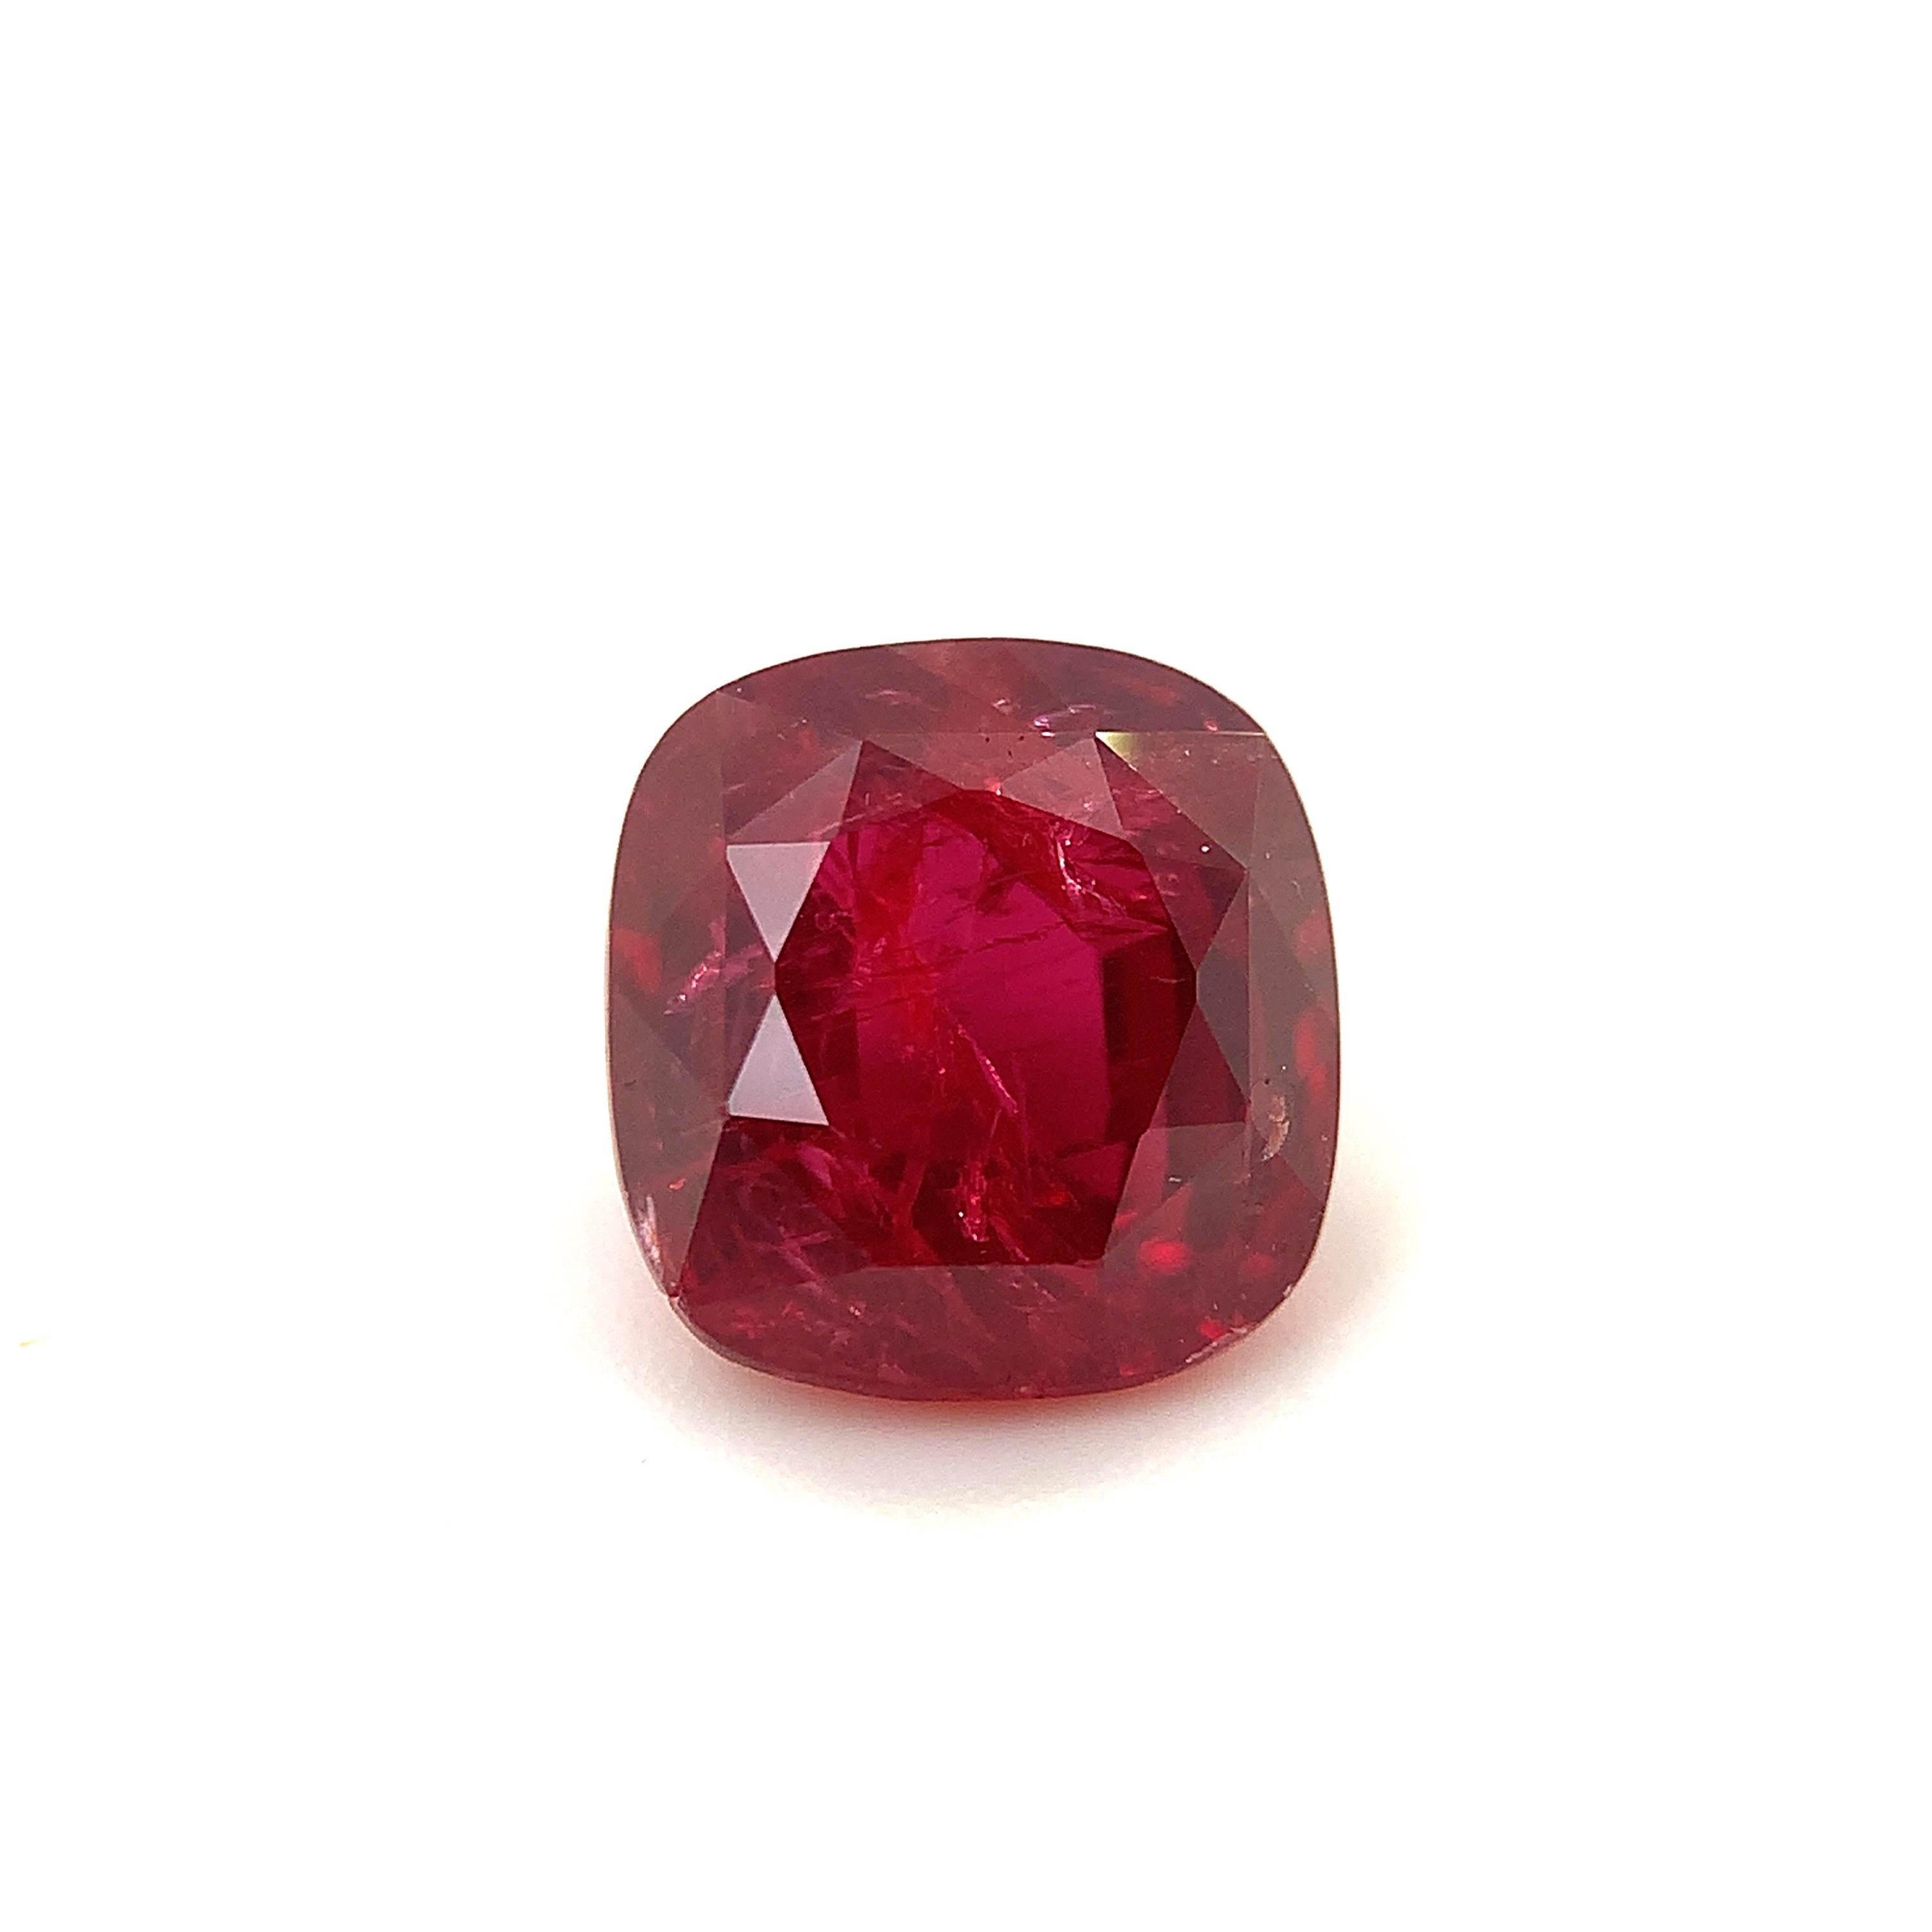 Unheated 3.53 Carat “Pigeon’s Blood” Ruby, GIA Certified 2